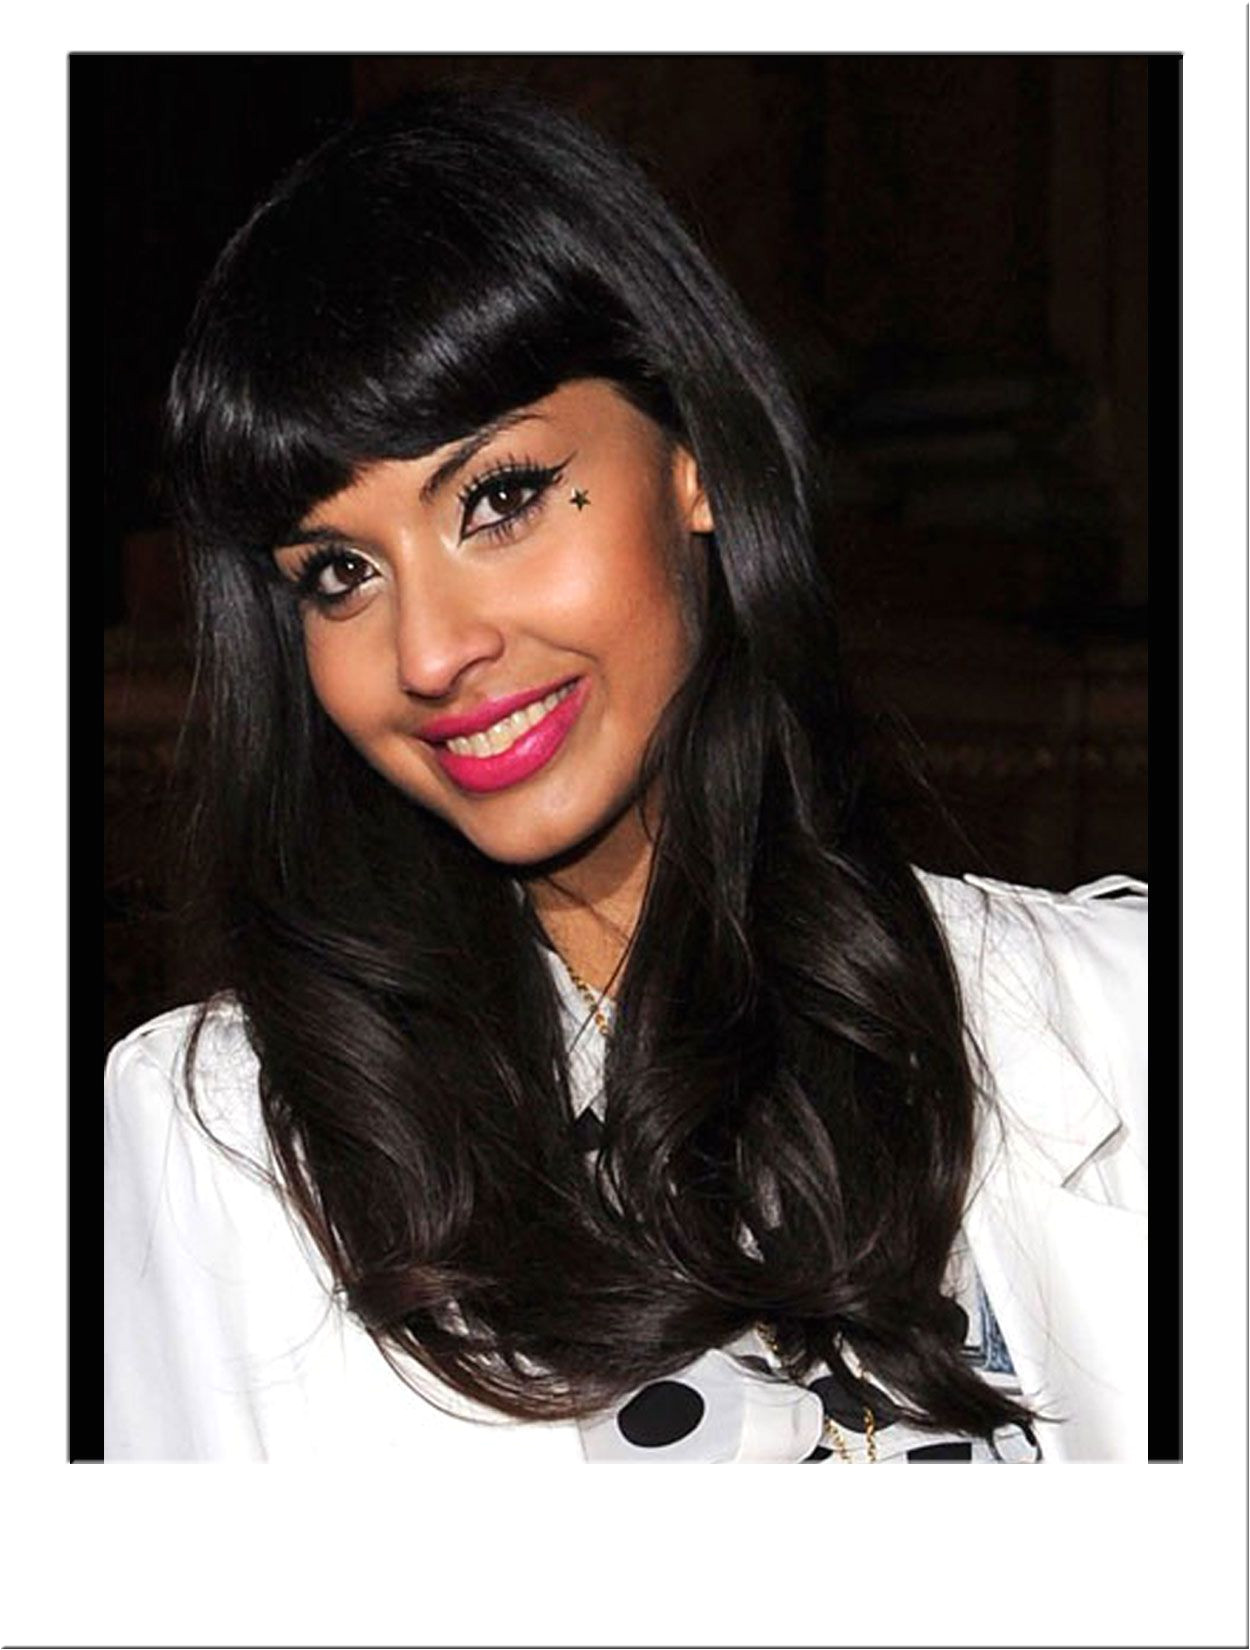 Jameela Jamil Retro Fashion Wig Inspired by Jameela Jamil s retro hairstyle This 1940 s style wig features long black hair lengths with vintage waves and